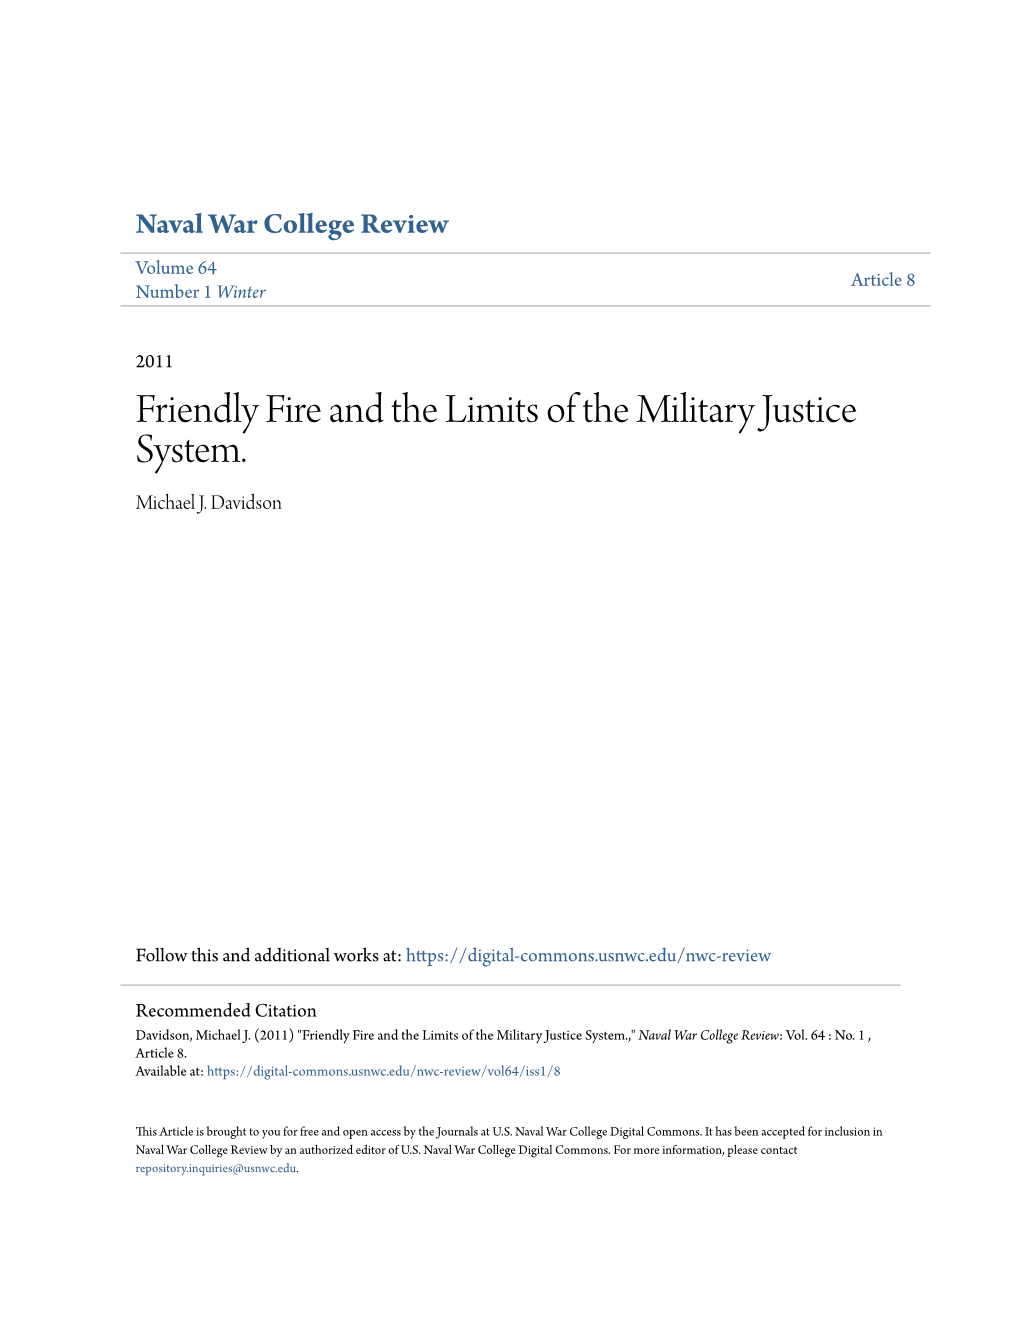 Friendly Fire and the Limits of the Military Justice System. Michael J